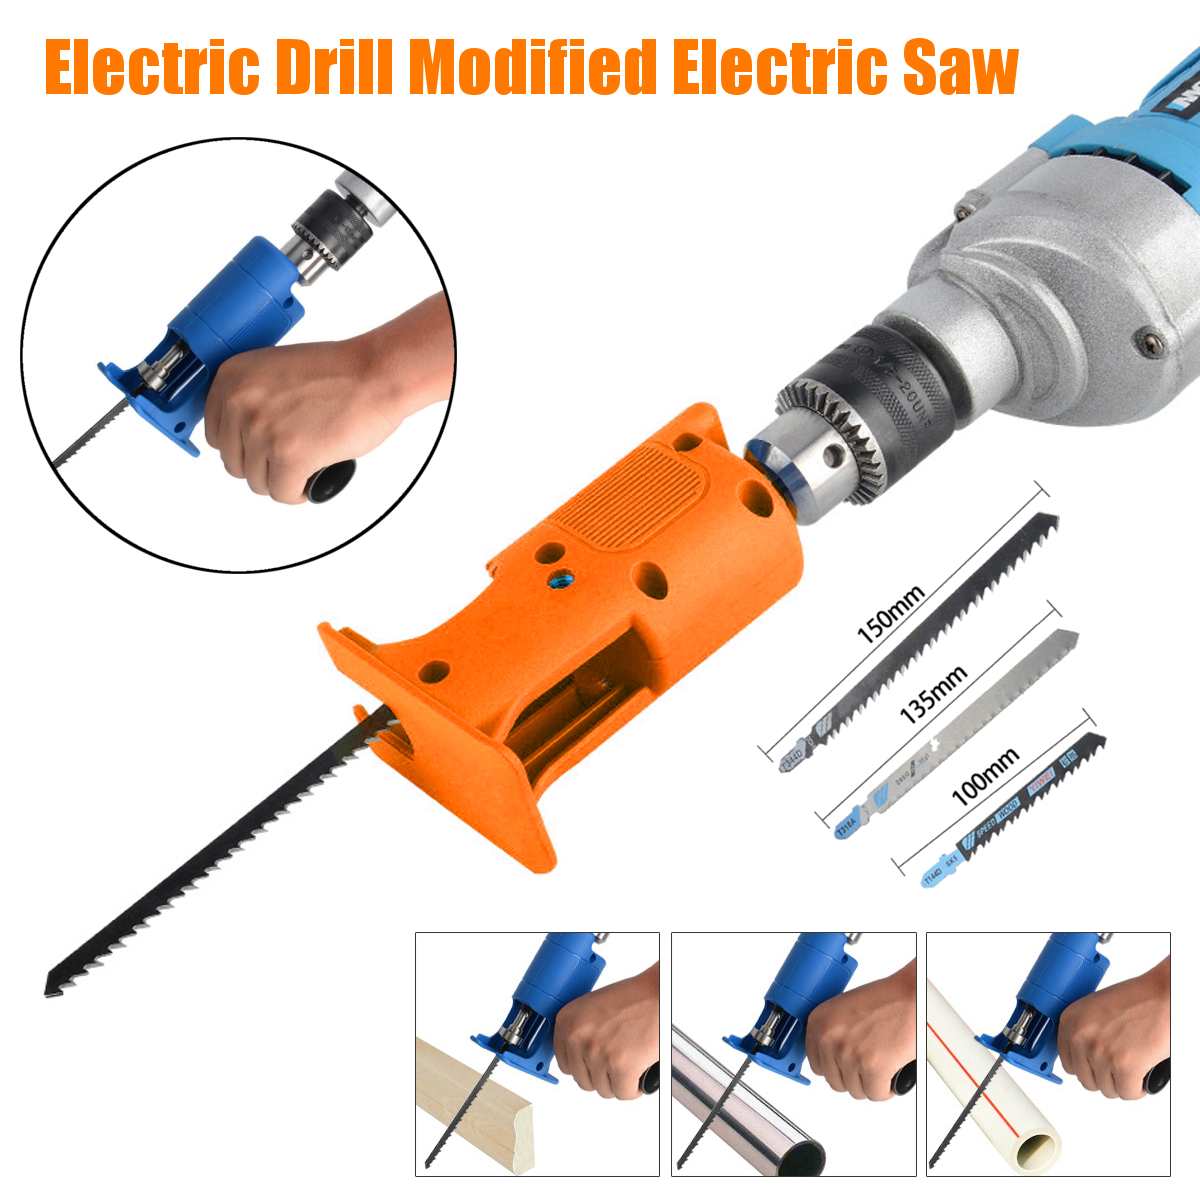 Drillpro-Reciprocating-Saw-Attachment-Adapter-Change-Electric-Drill-Into-Reciprocating-Saw-for-Wood--1711693-1